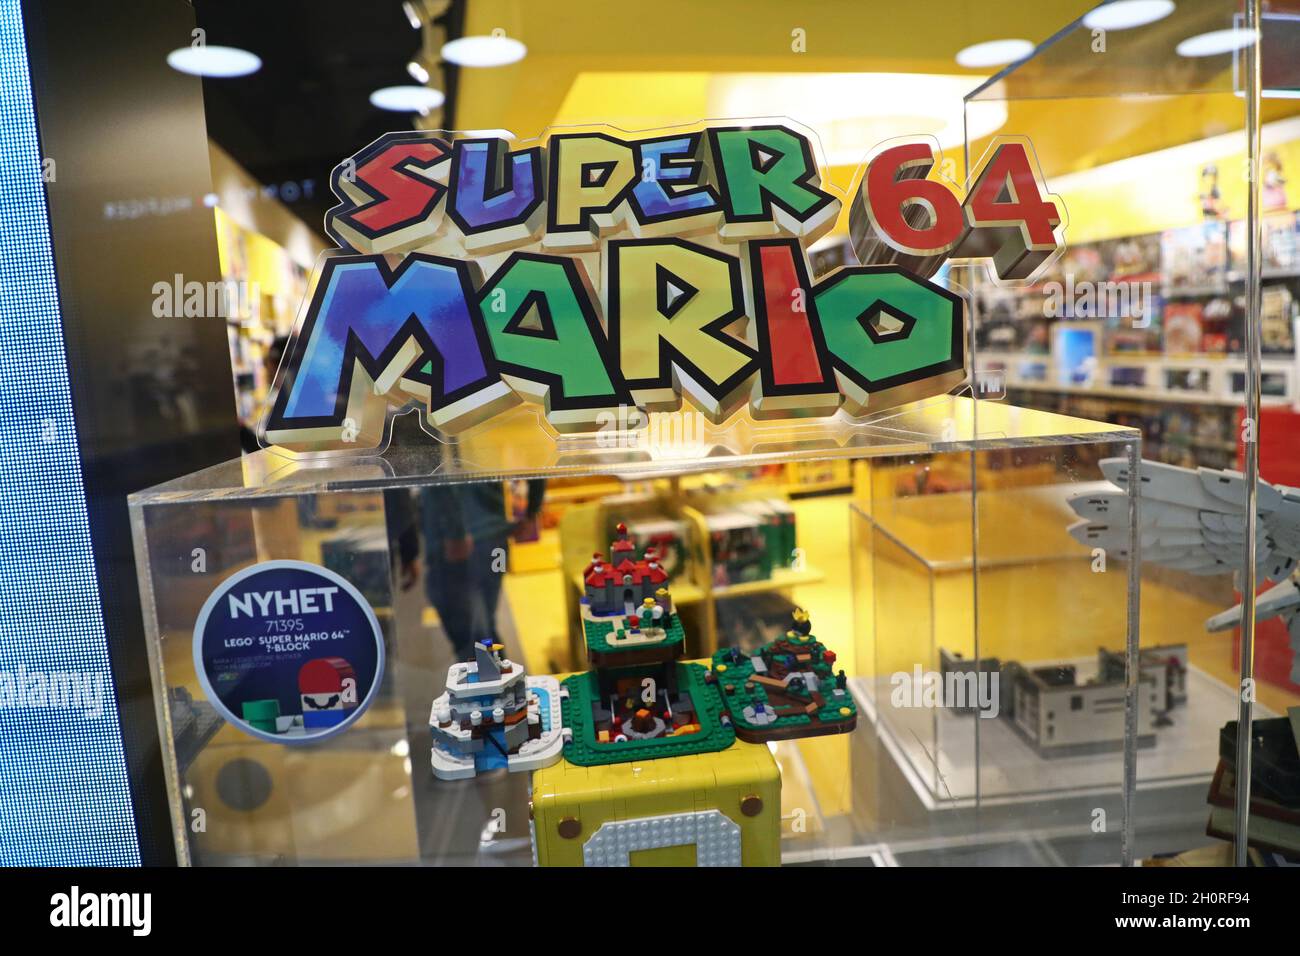 Super Mario 64 in a LEGO Store, Westfield Mall of Scandinavia in Solna, Stockholm, Sweden, during Sunday afternoon. Stock Photo